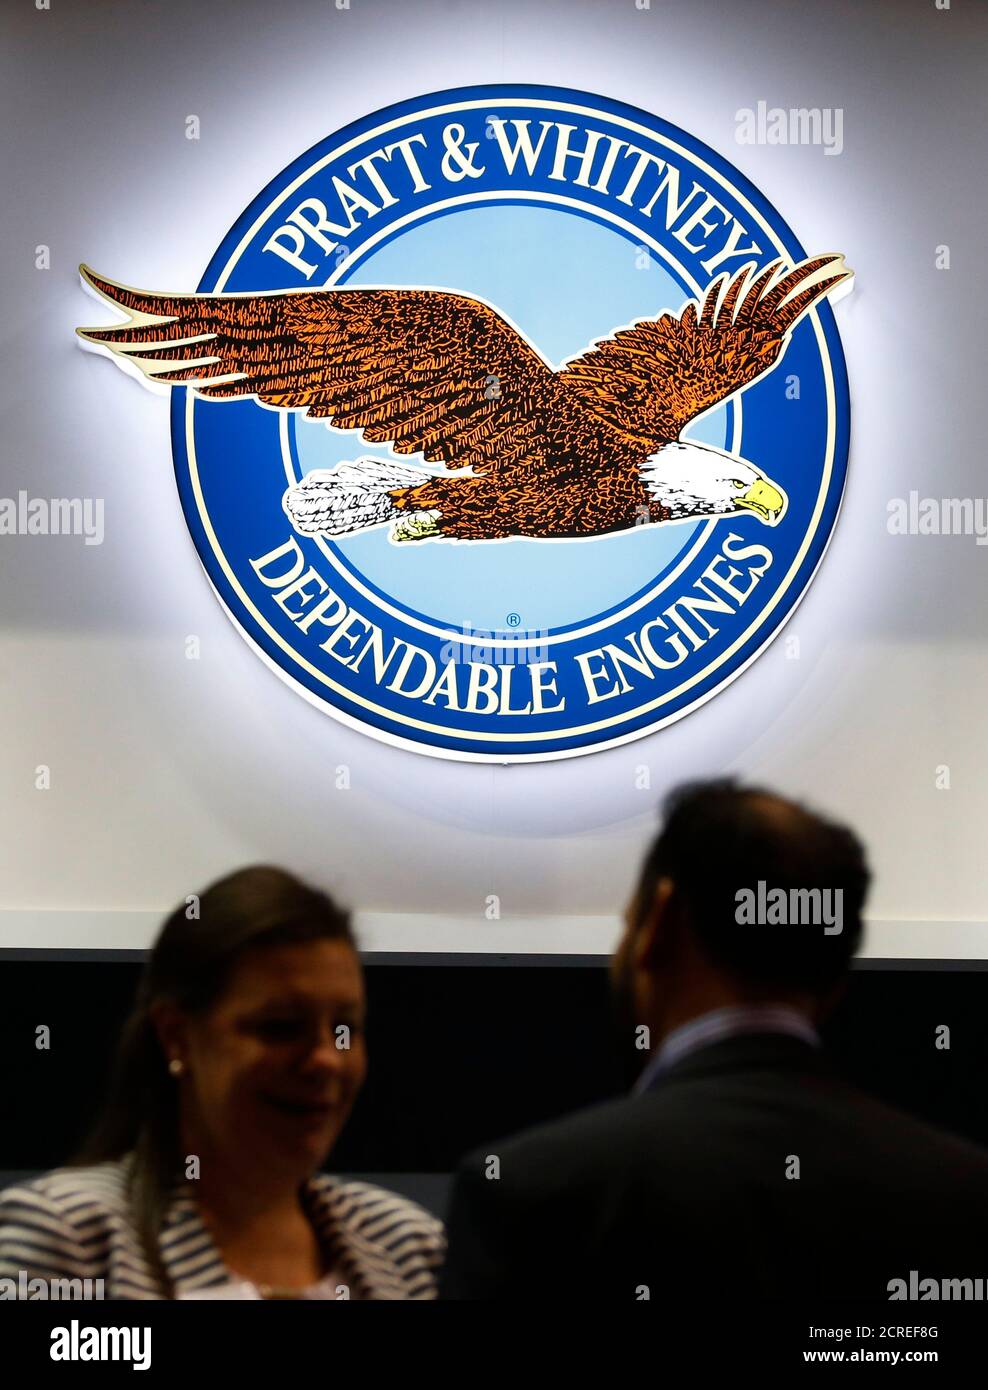 Pratt and Whitney Dependable Engines Stickers New Style 